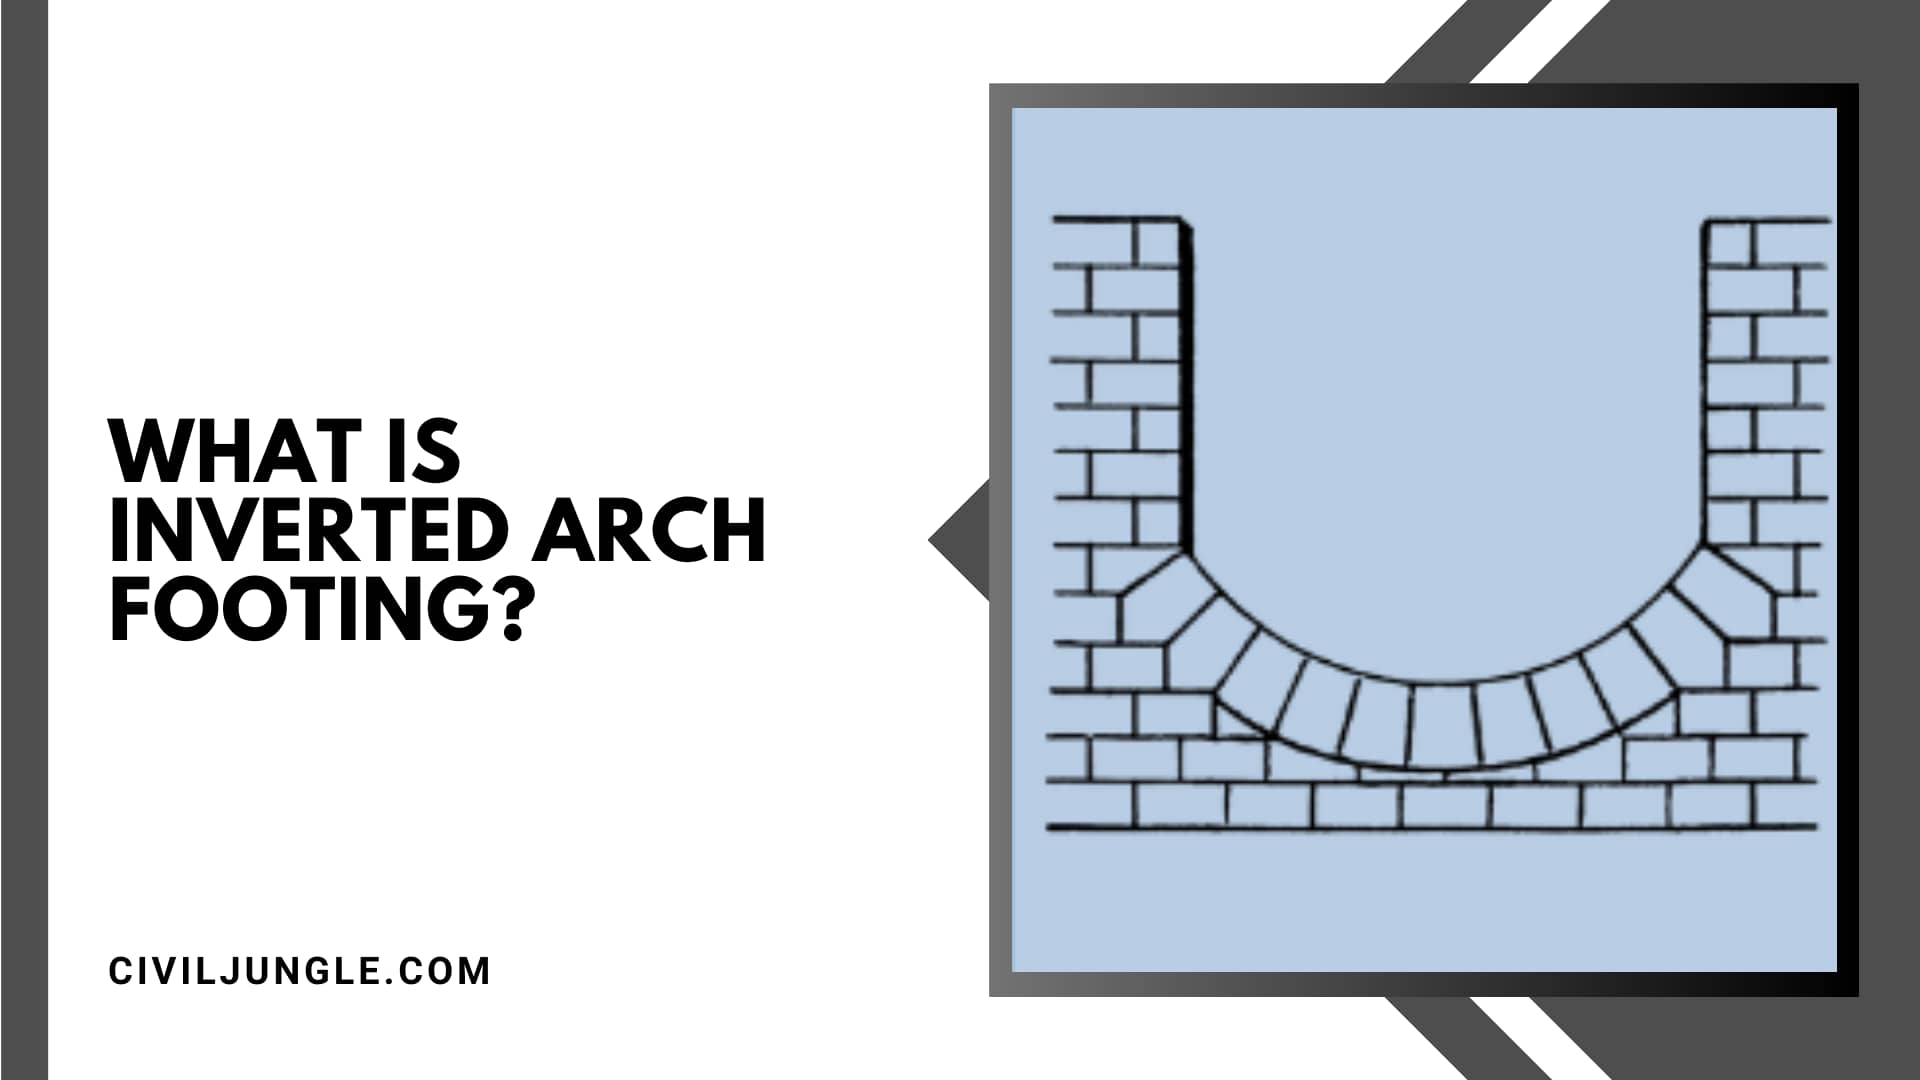 What Is Inverted Arch Footing?